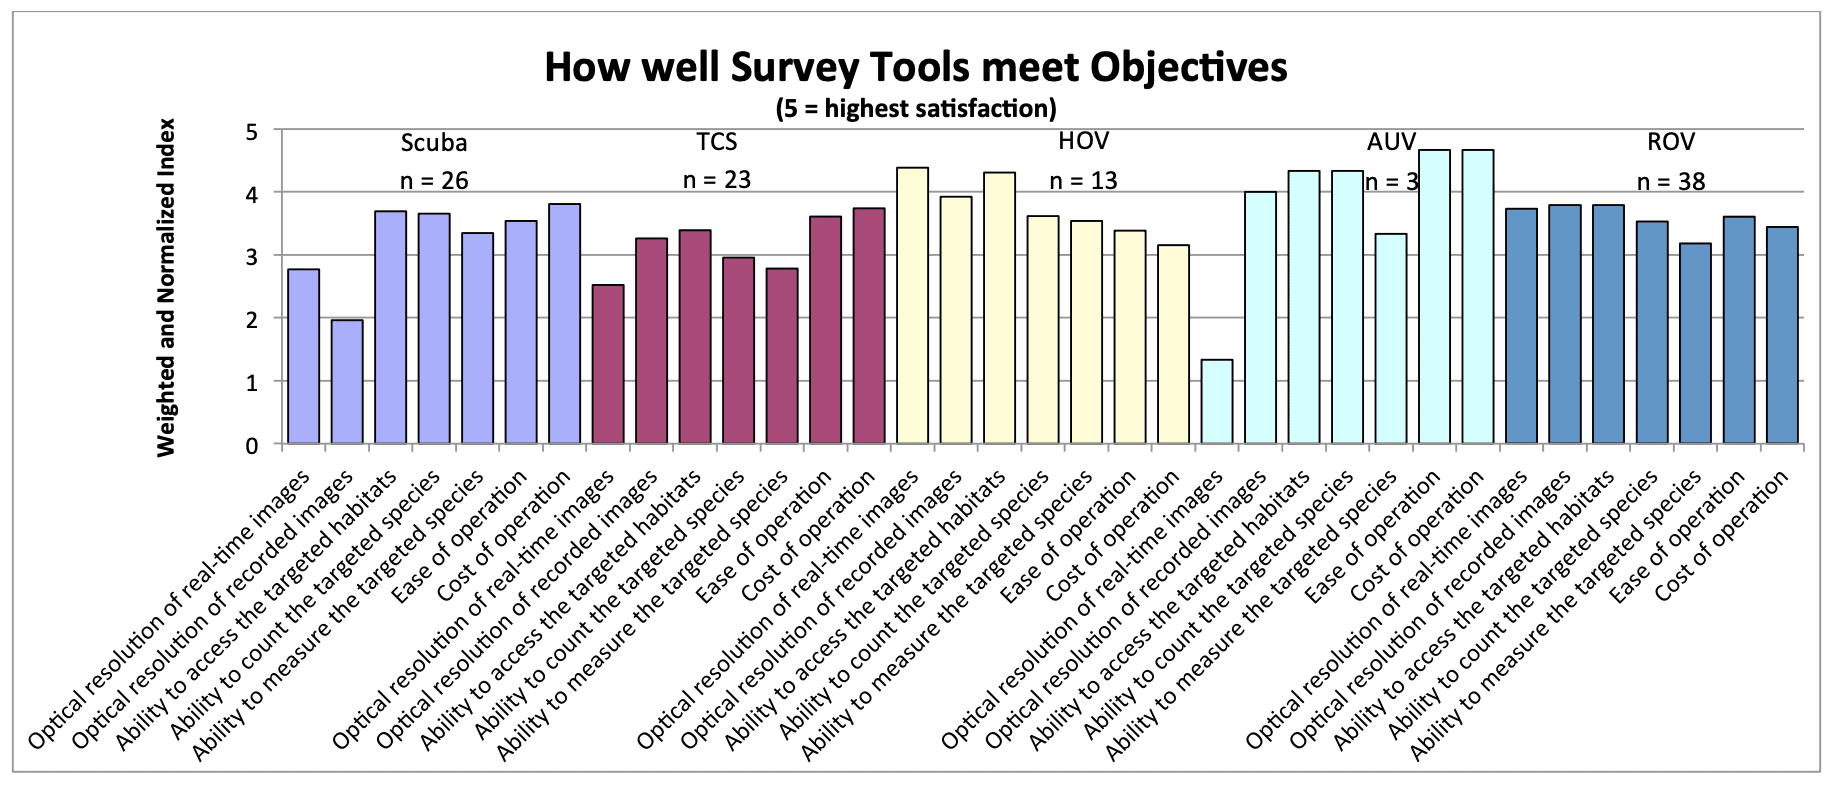 June 2015 - A COMPARATIVE ASSESSMENT OF UNDERWATER VISUAL SURVEY TOOLS: 17